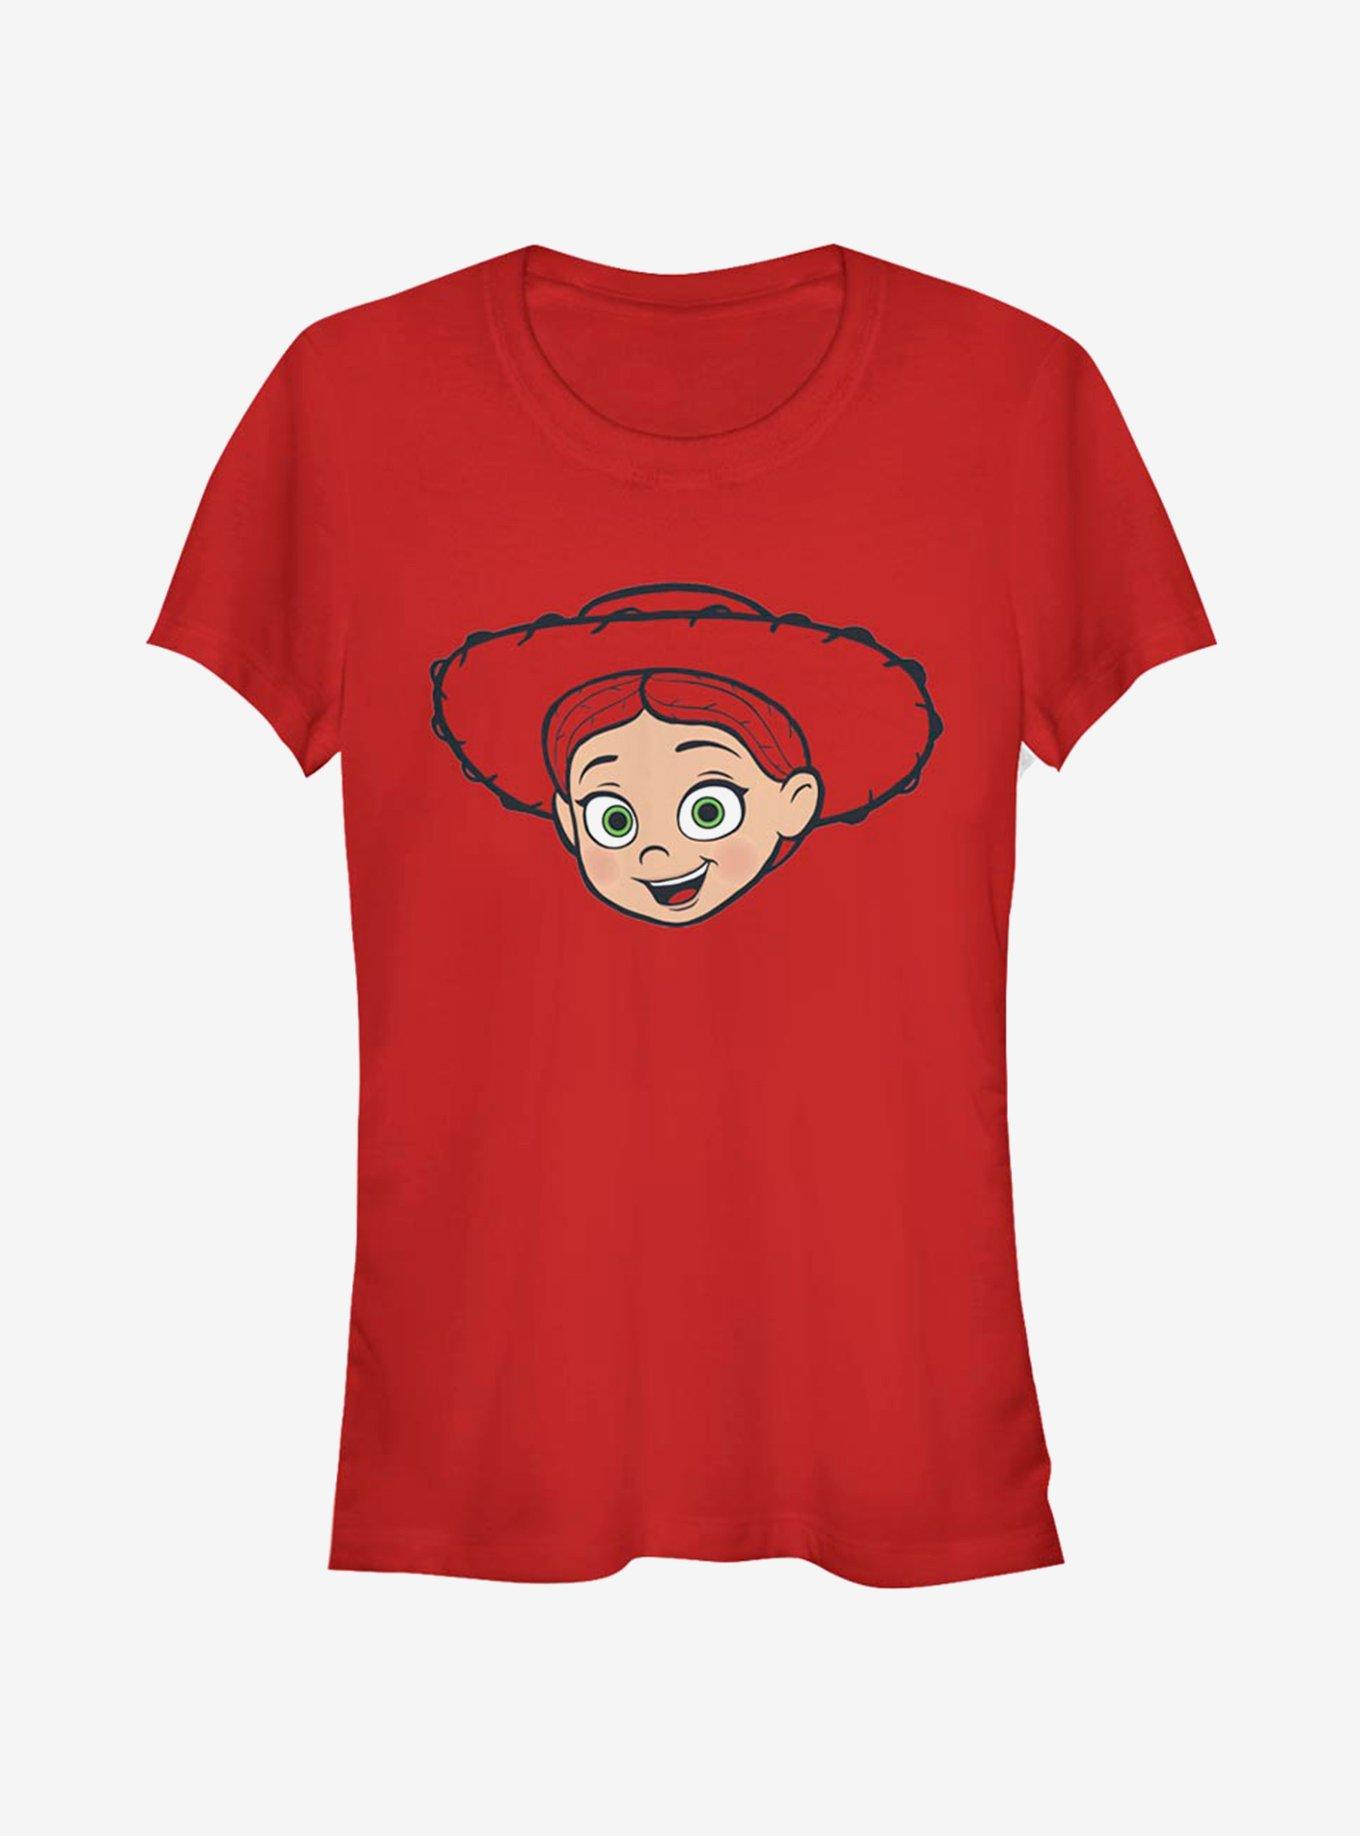 Disney Pixar Toy Story 4 Big Face Jessie Girls T-Shirt - RED | Hot Topic